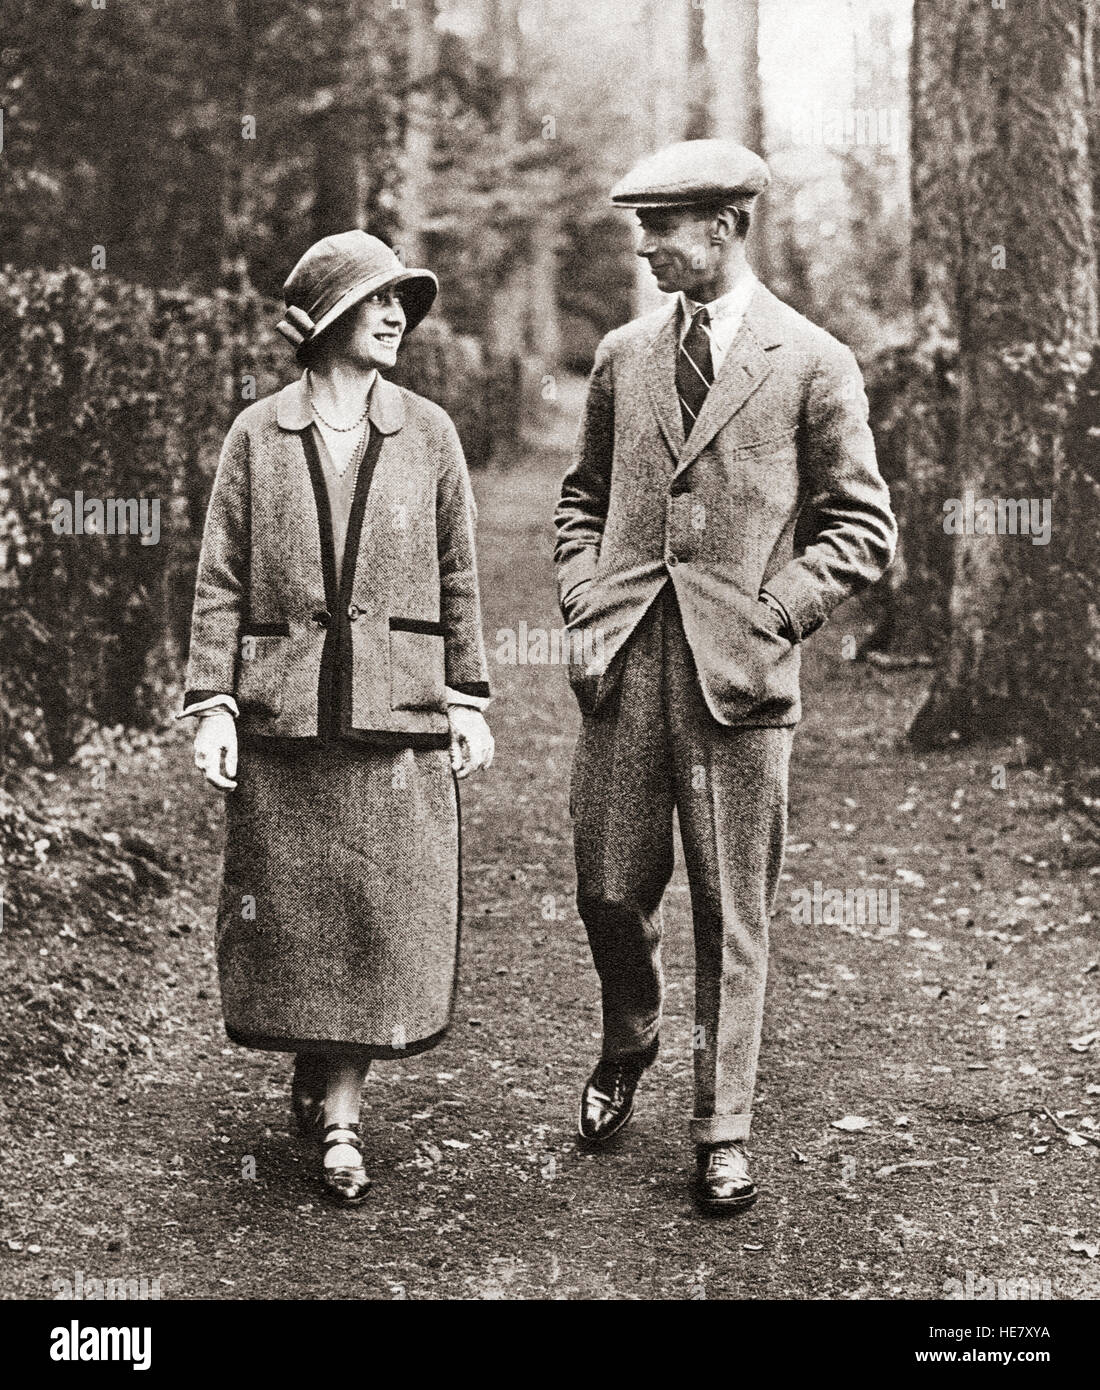 The Duke and Duchess of York strolling through the grounds of Polesdon Lacey, Surrey, England, on thier honeymoon in 1923.  Prince Albert, future King George VI, 1895 – 1952.  King of the United Kingdom and the Dominions of the British Commonwealth. Elizabeth Angela Marguerite Bowes-Lyon, future Queen Elizabeth, 1900 –2002. Stock Photo